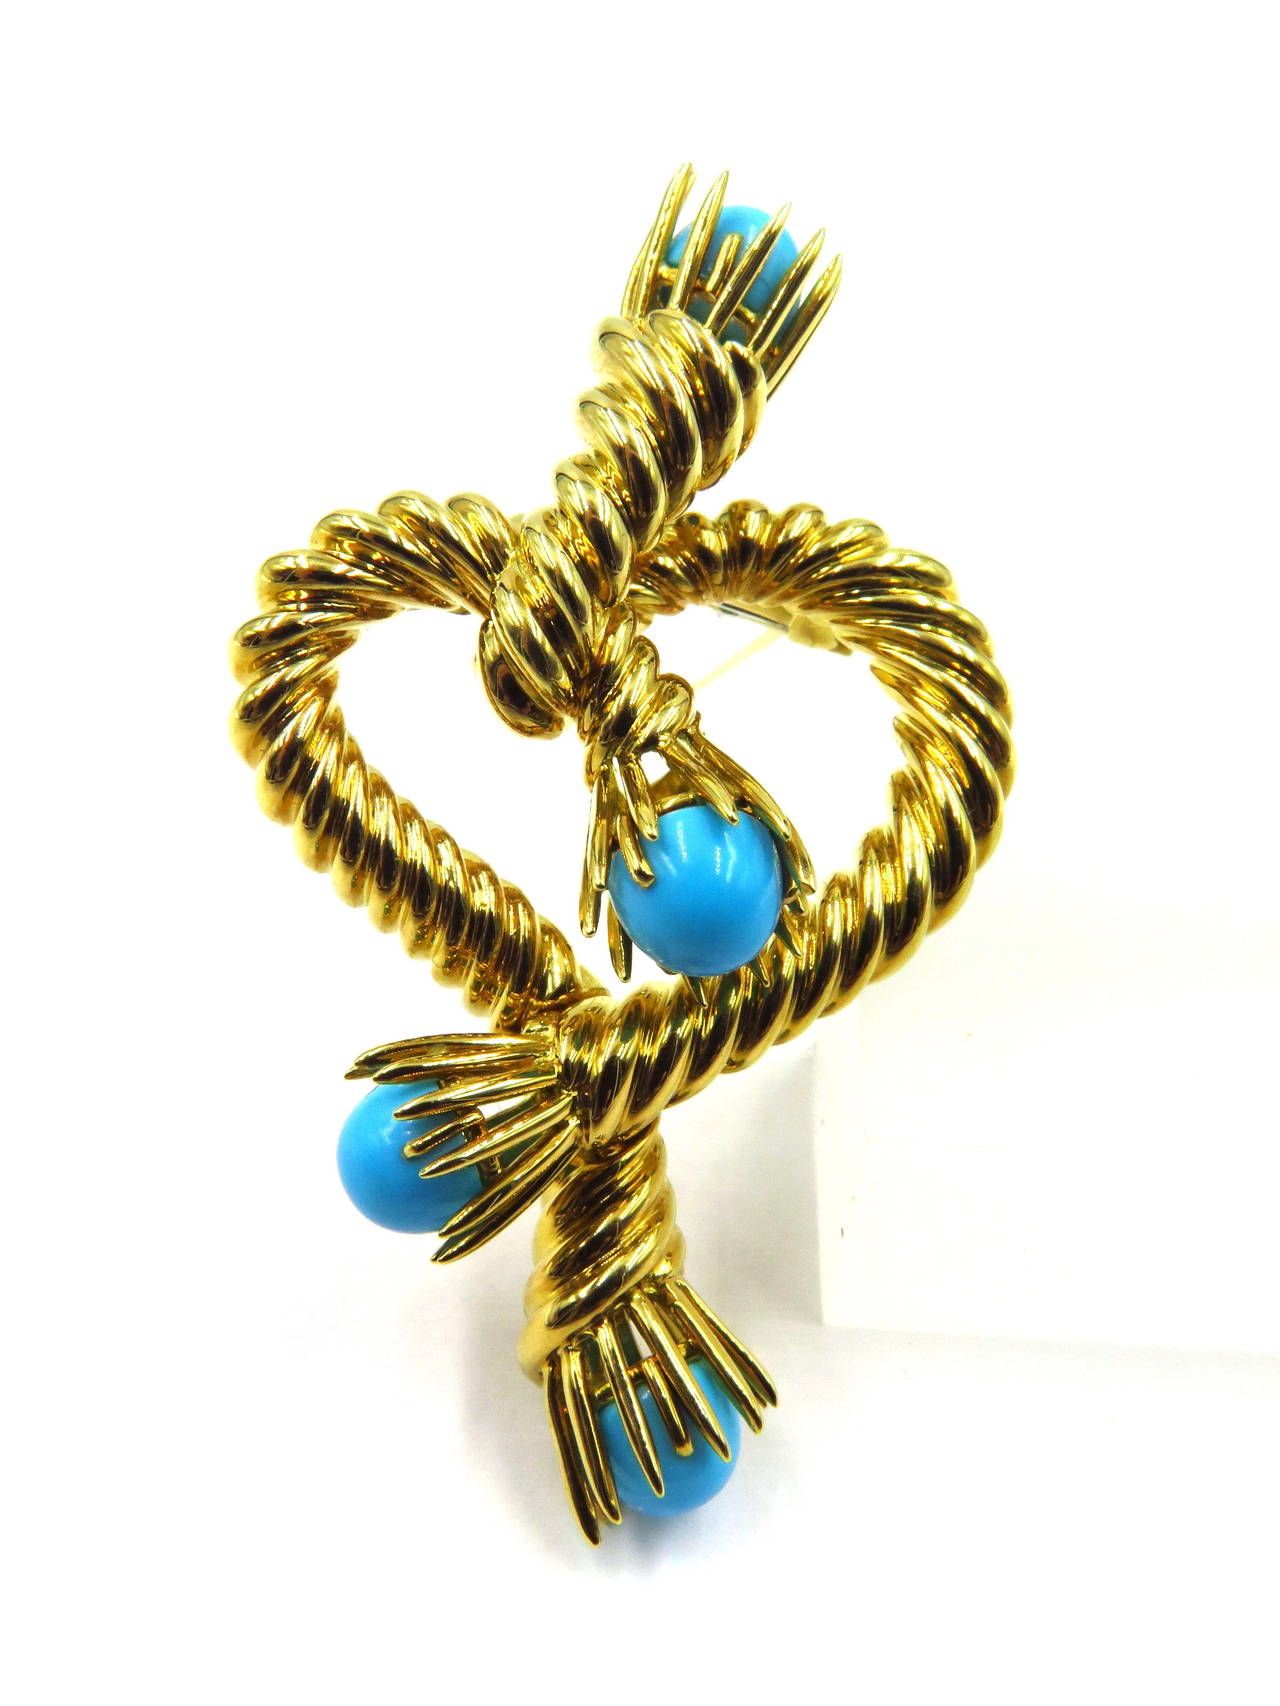 This large romantic roped heart design brooch is accented with 4 turquoise stones. Signed Tiffany & Co Schlumberger Studios 750,  Offered in original box.
